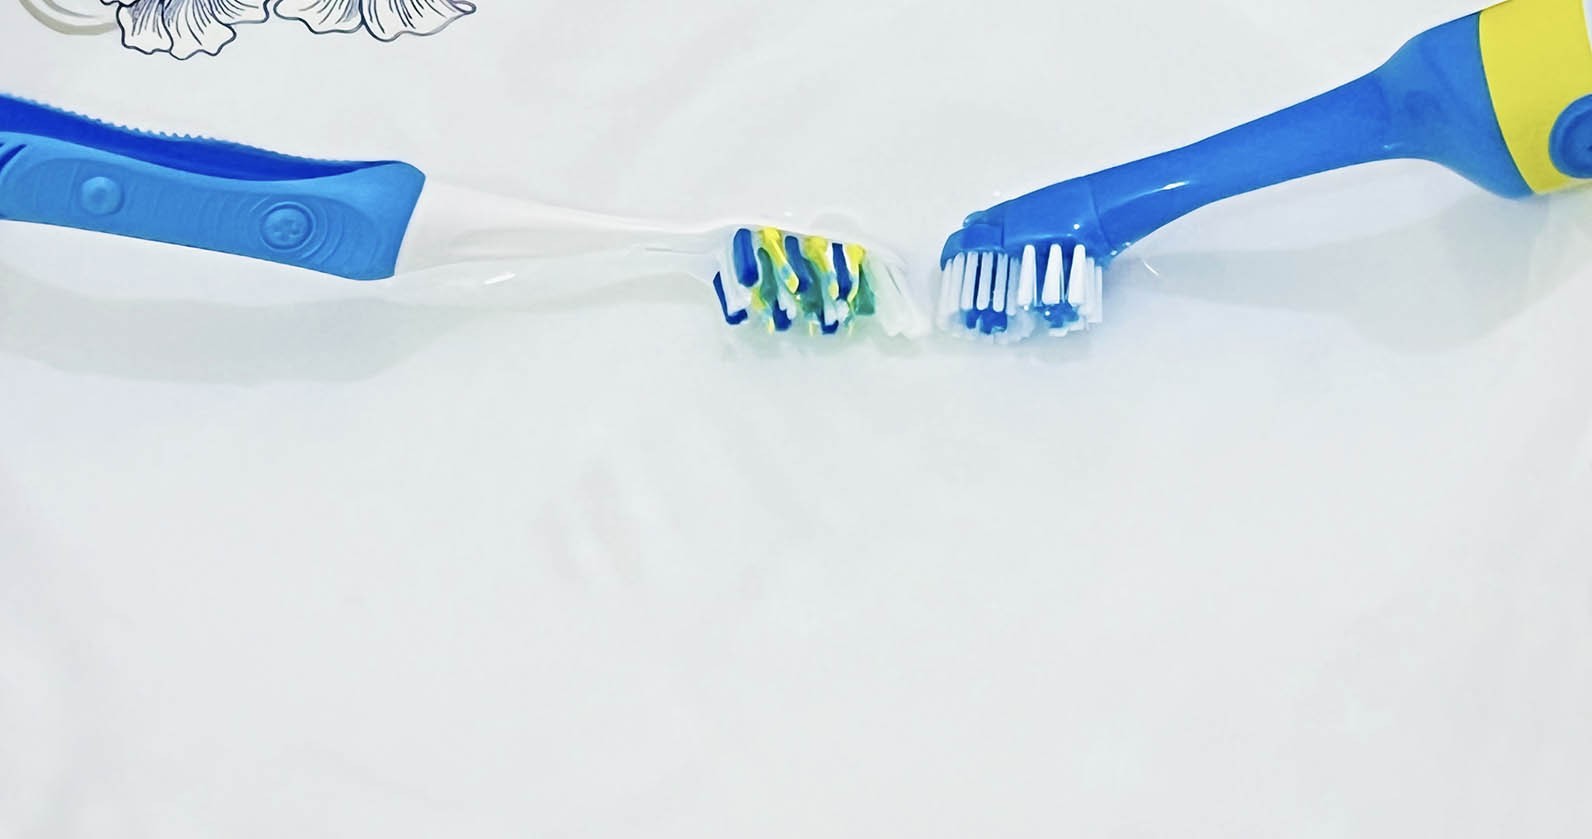 How To Remove Mold From Toothbrush?